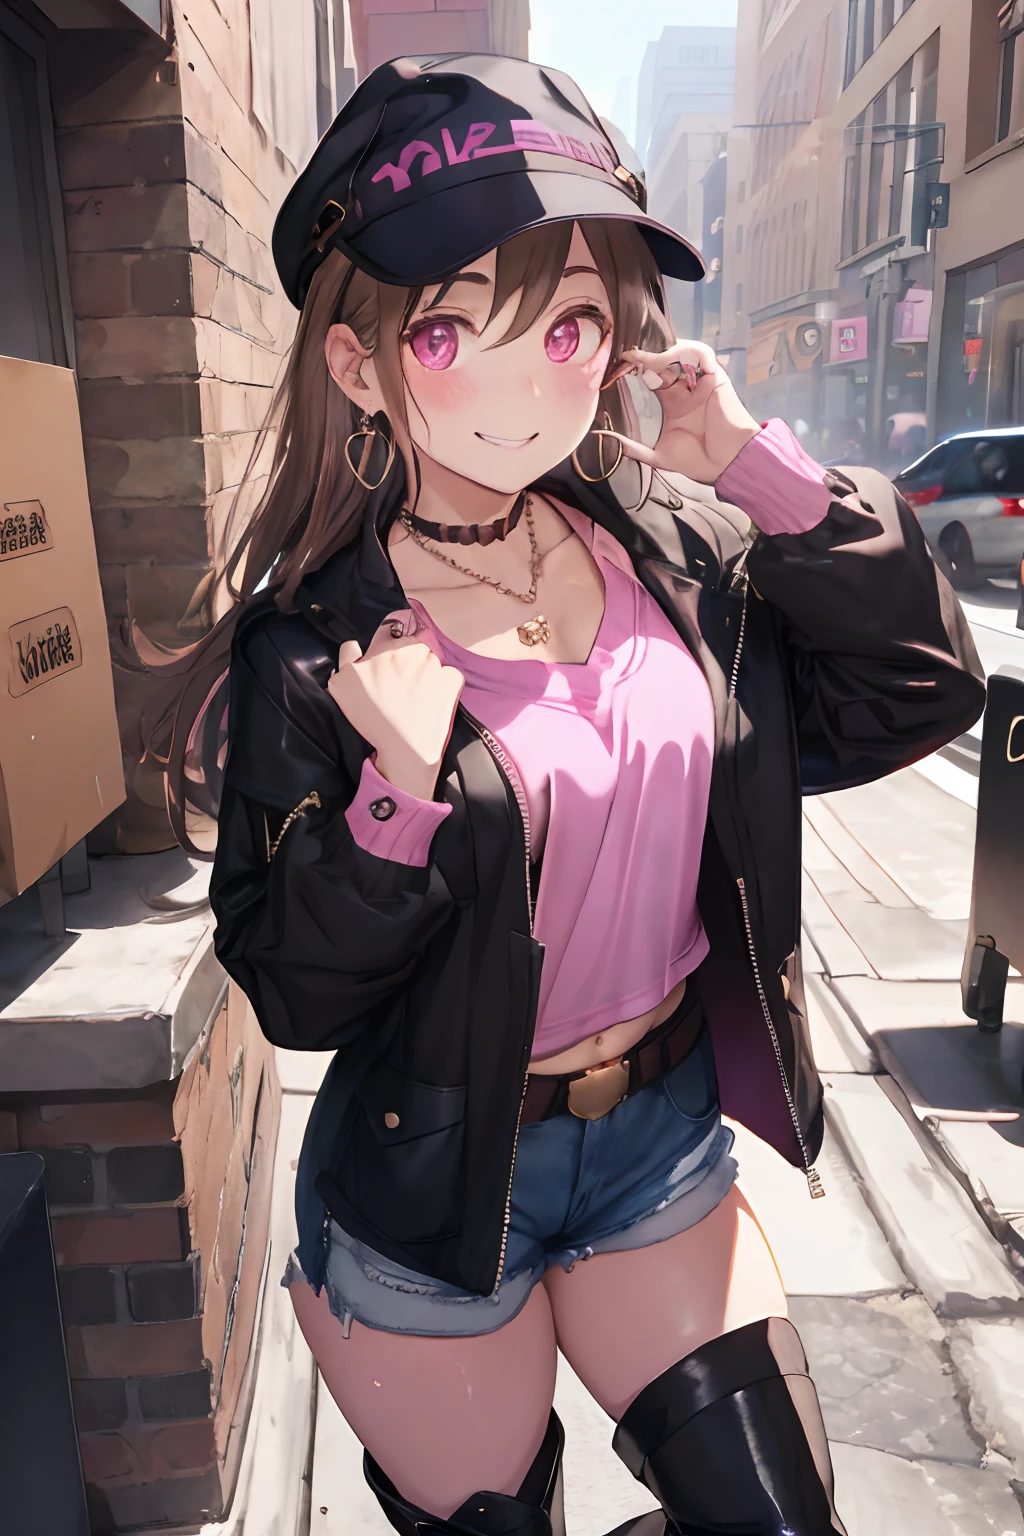 Crowded Downtown,Long-sleeved T-shirt with a revealing chest,Navel Fashion,Oversized jacket,Shorts and knee-high socks,garterbelts,long boots, Light Brown Straight Hair,Eyes are pink,Gesture to remove sunglasses,Wearing a hat with a brim,Shoulder bag,Tapioca Drink,slightly red cheeks,A smile,Smile a little depressed and embarrassed,Ring earrings,Packed with accessories such as necklaces and rings,gals